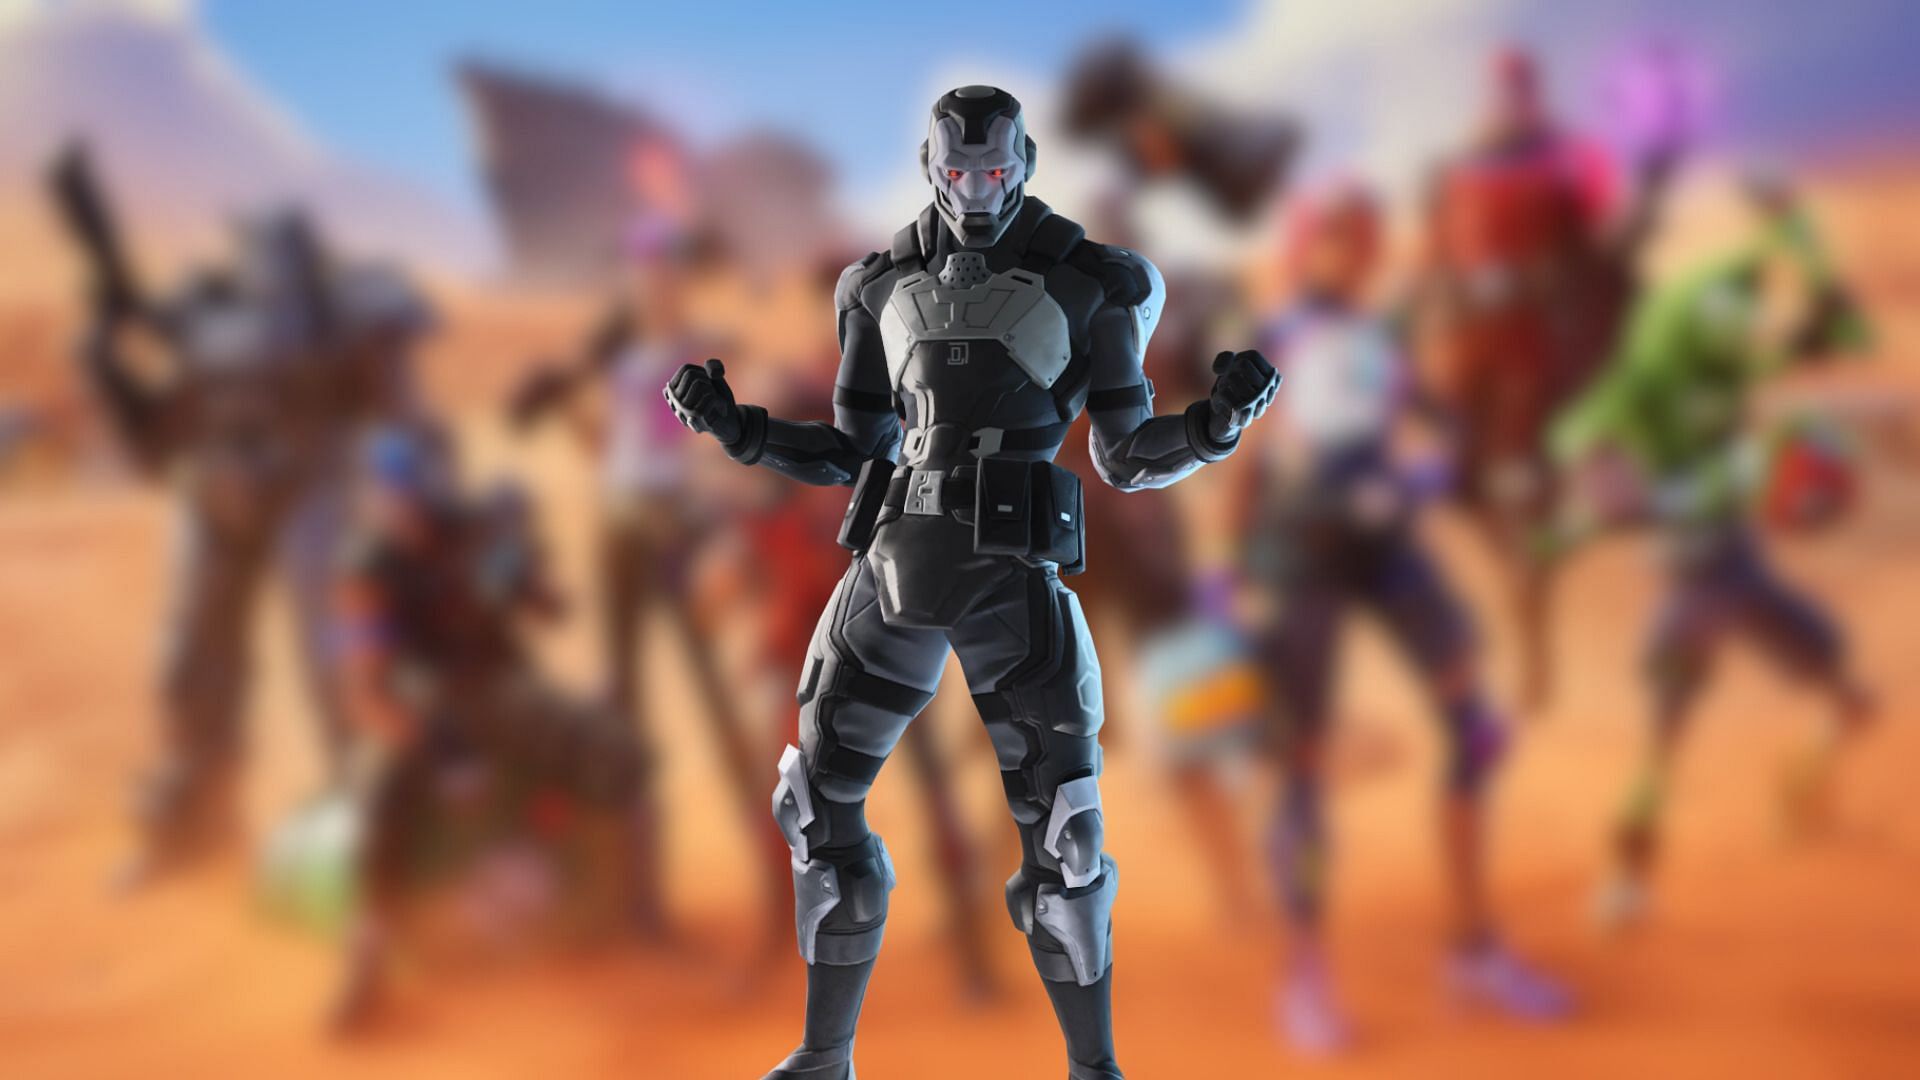 &ldquo;Can we please have this skin&rdquo;: Fortnite community wants IO Patrols to become an in-game outfit